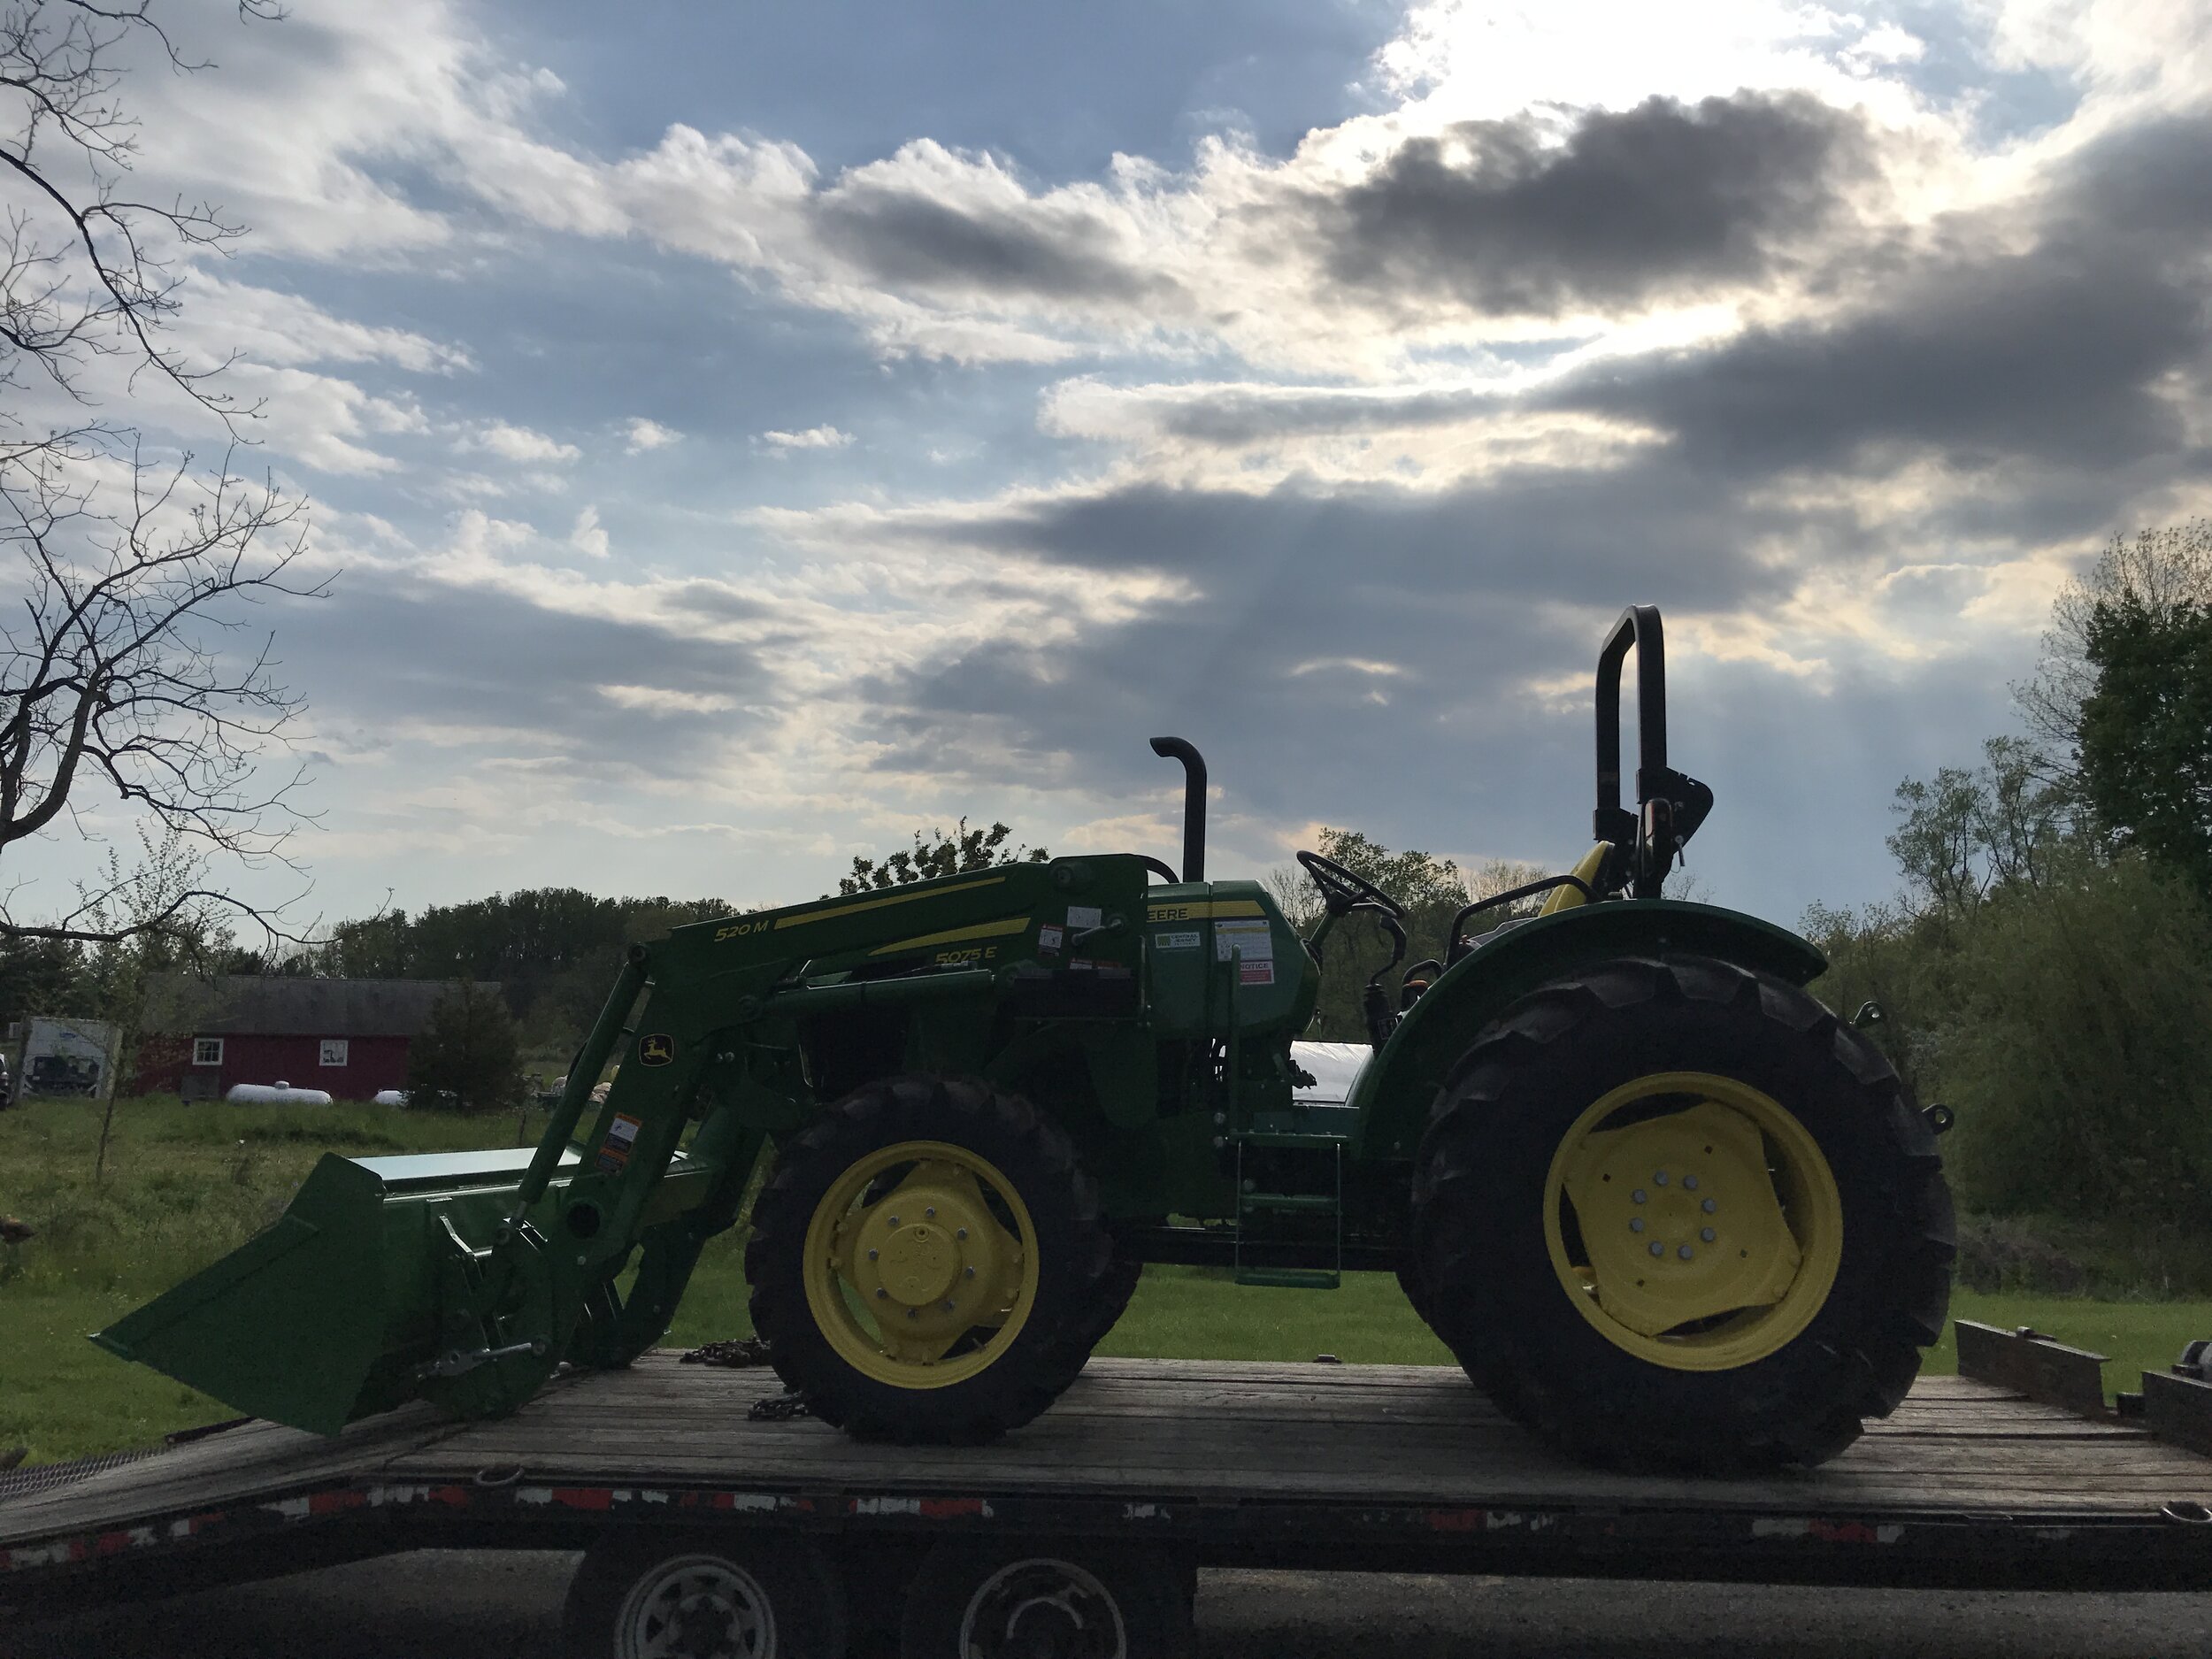  Our new tractor! Hopefully a few less trips to the mechanic this season… (if any one is looking for a tractor we have a few for sale, email me) 